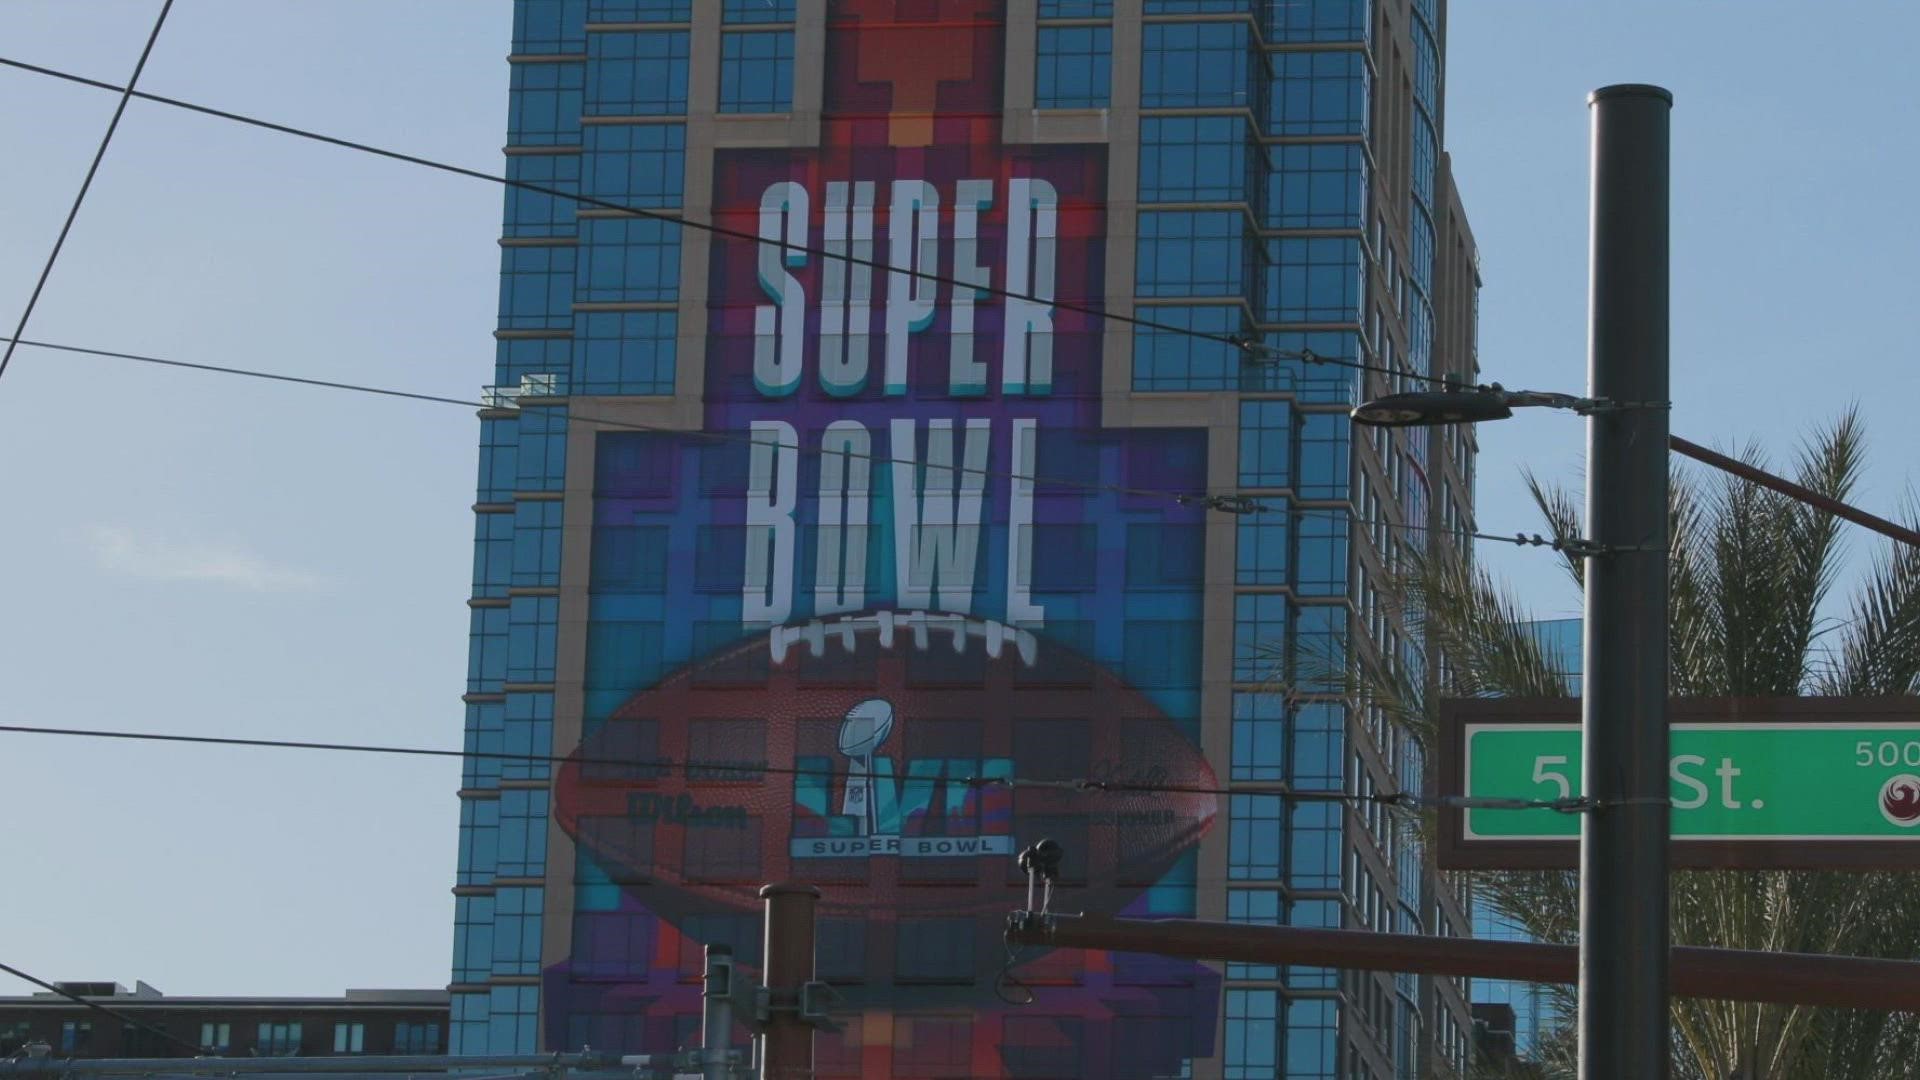 12News takes a behind-the-scenes tour of how massive Super Bowl signs are made.